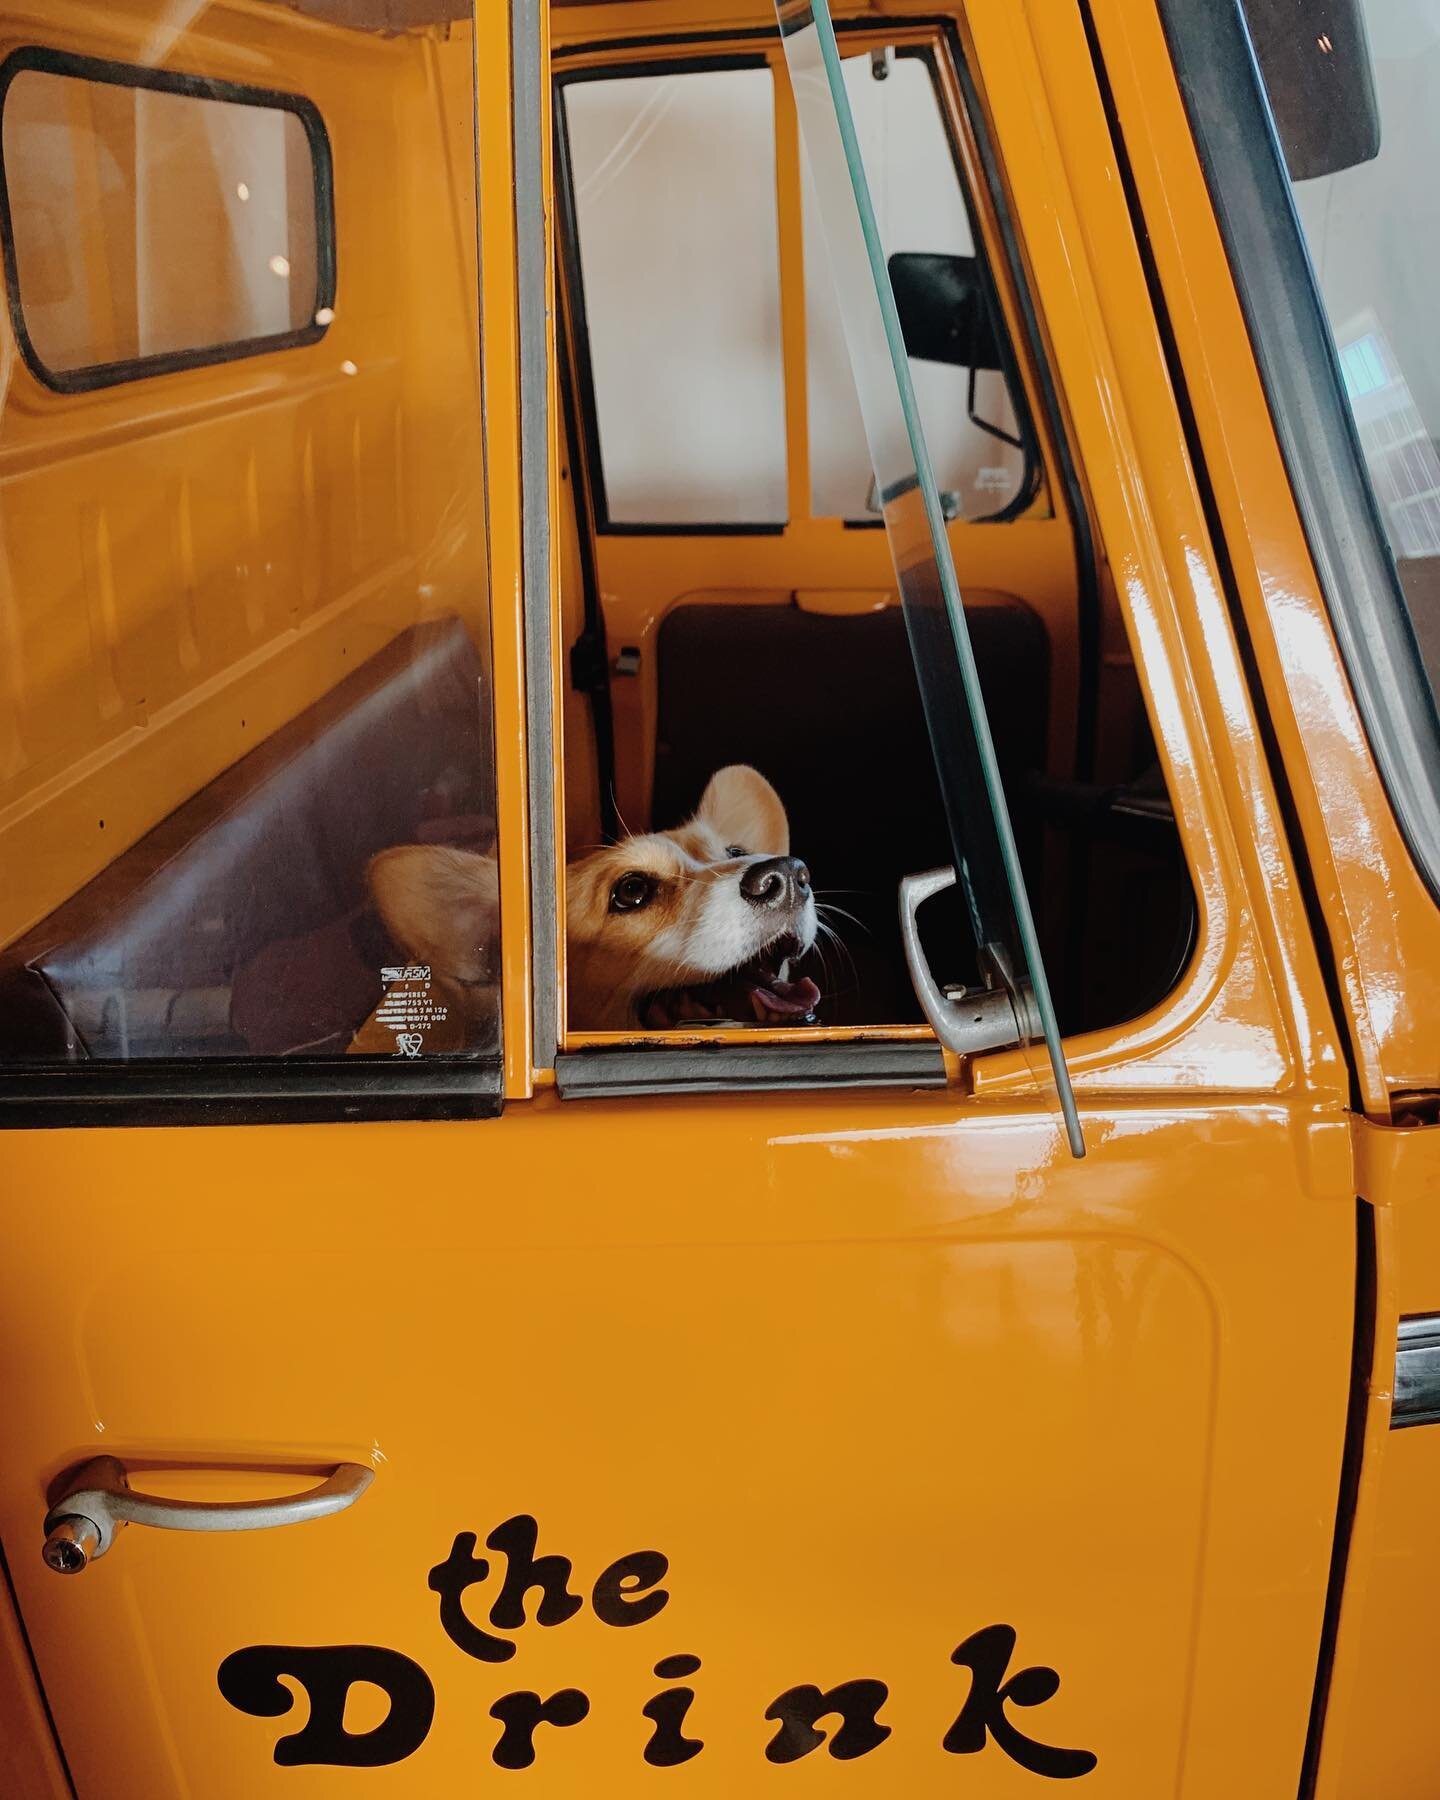 Coffee and corgis! What more could you want? 

The Drink Coffee Cart will be up and running this Spring! ☕️

#thedrink #healdsburg #coffeeandcorgis